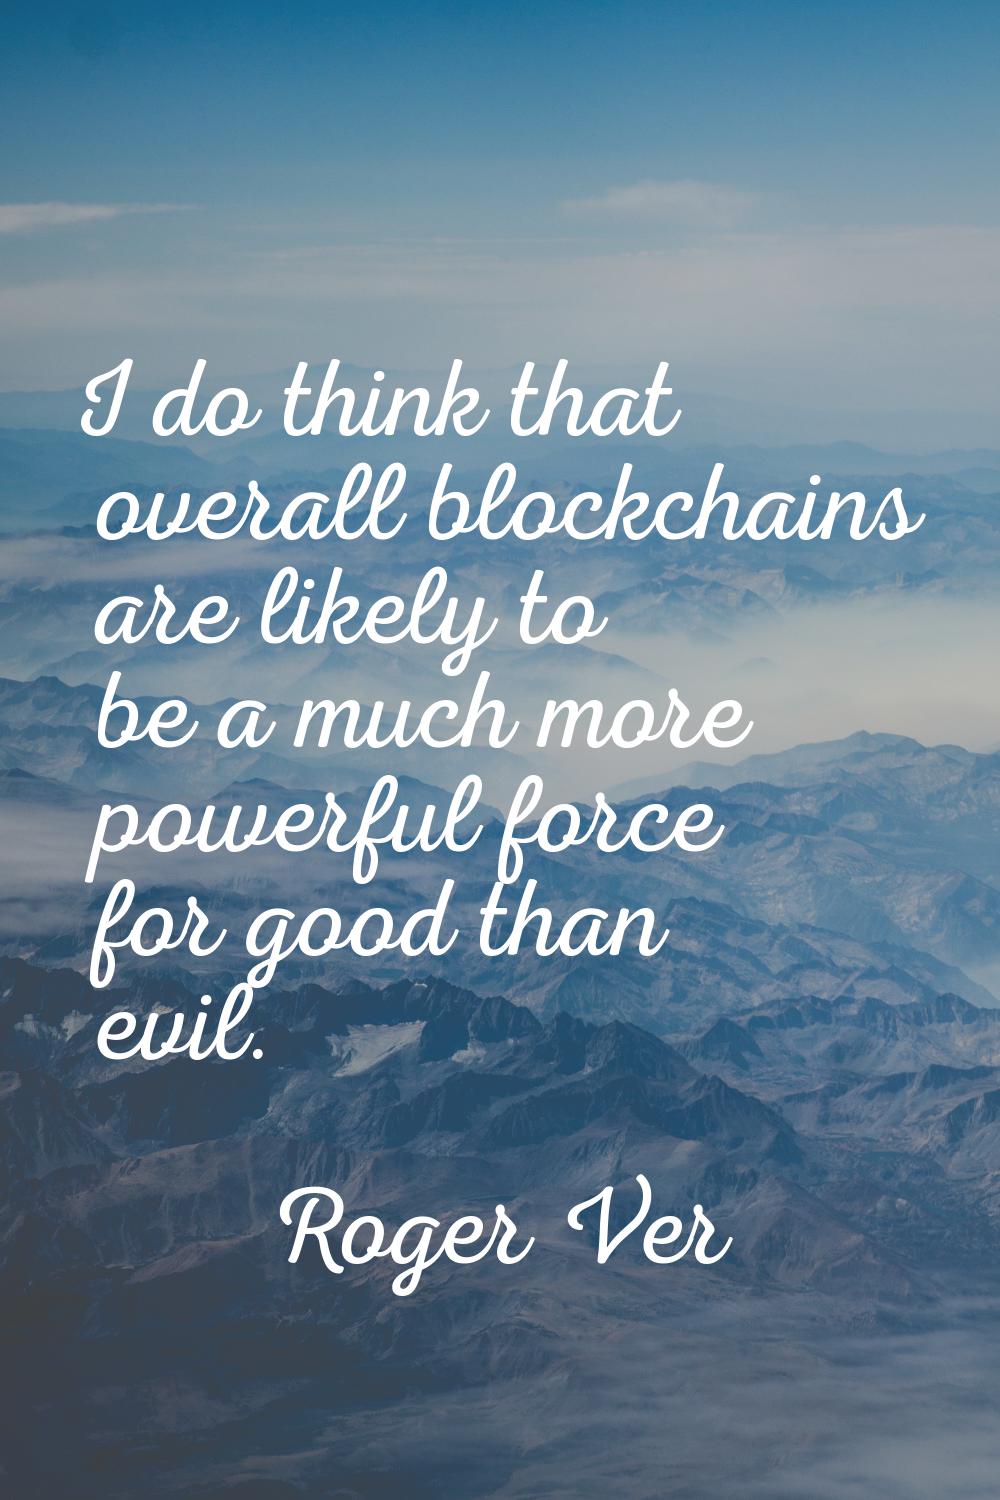 I do think that overall blockchains are likely to be a much more powerful force for good than evil.